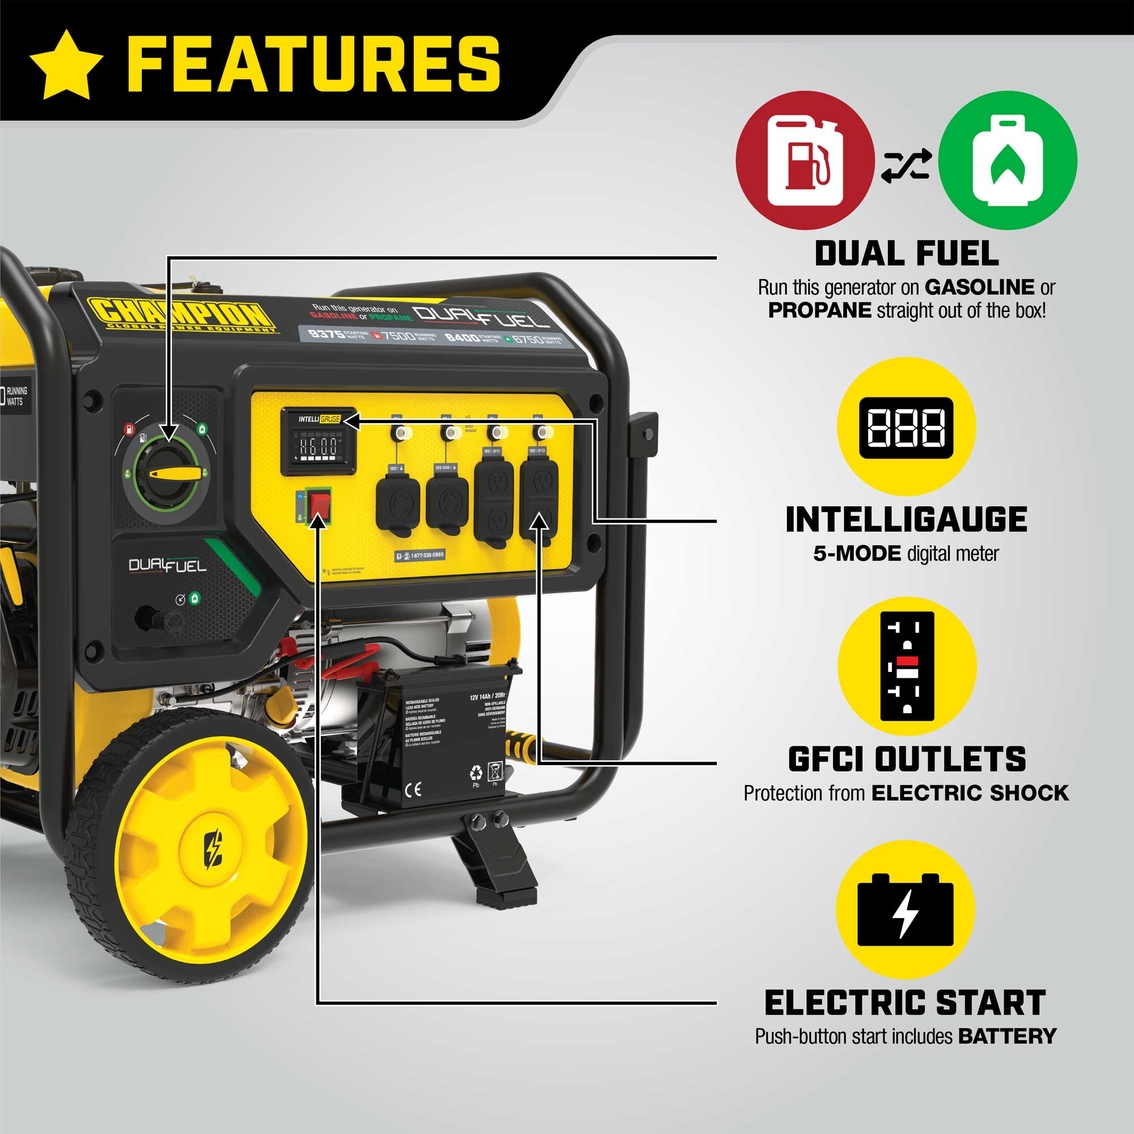 Champion 7500W Dual Fuel Portable Generator with Electric Start - Image 4 of 8